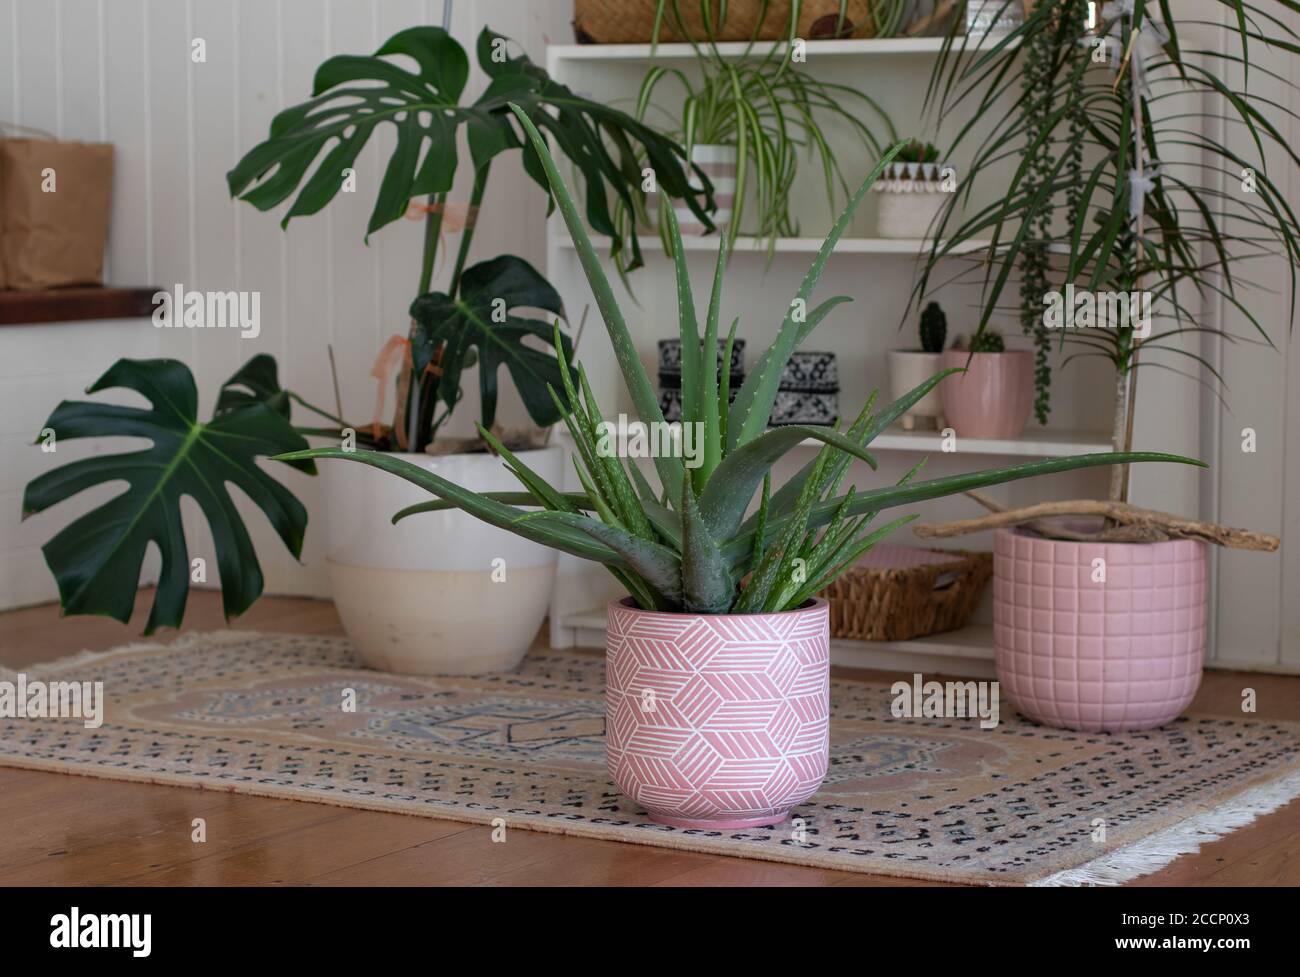 group of indoor potted plants in white room with wooden floor Stock Photo